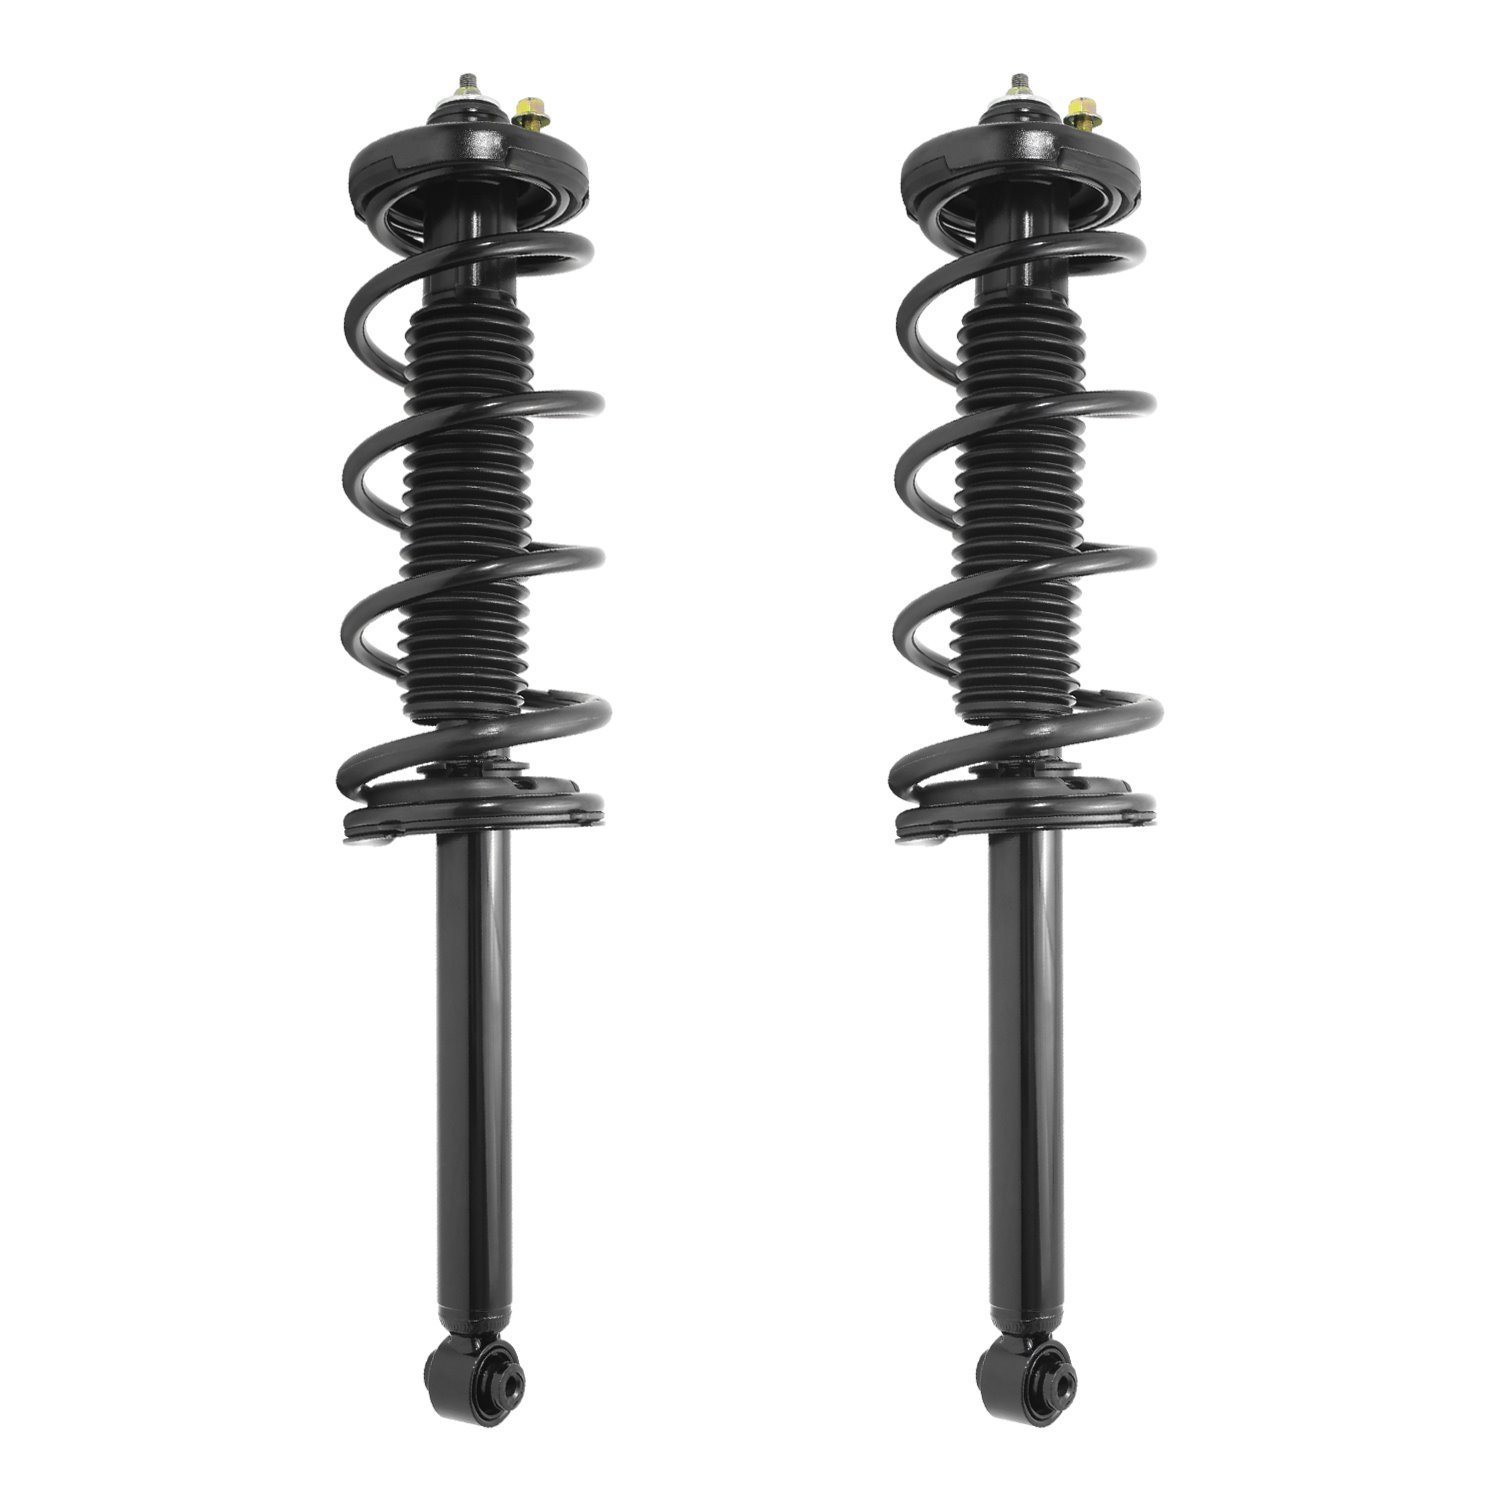 2-15100-001 Suspension Strut & Coil Spring Assembly Set Fits Select Acura TL